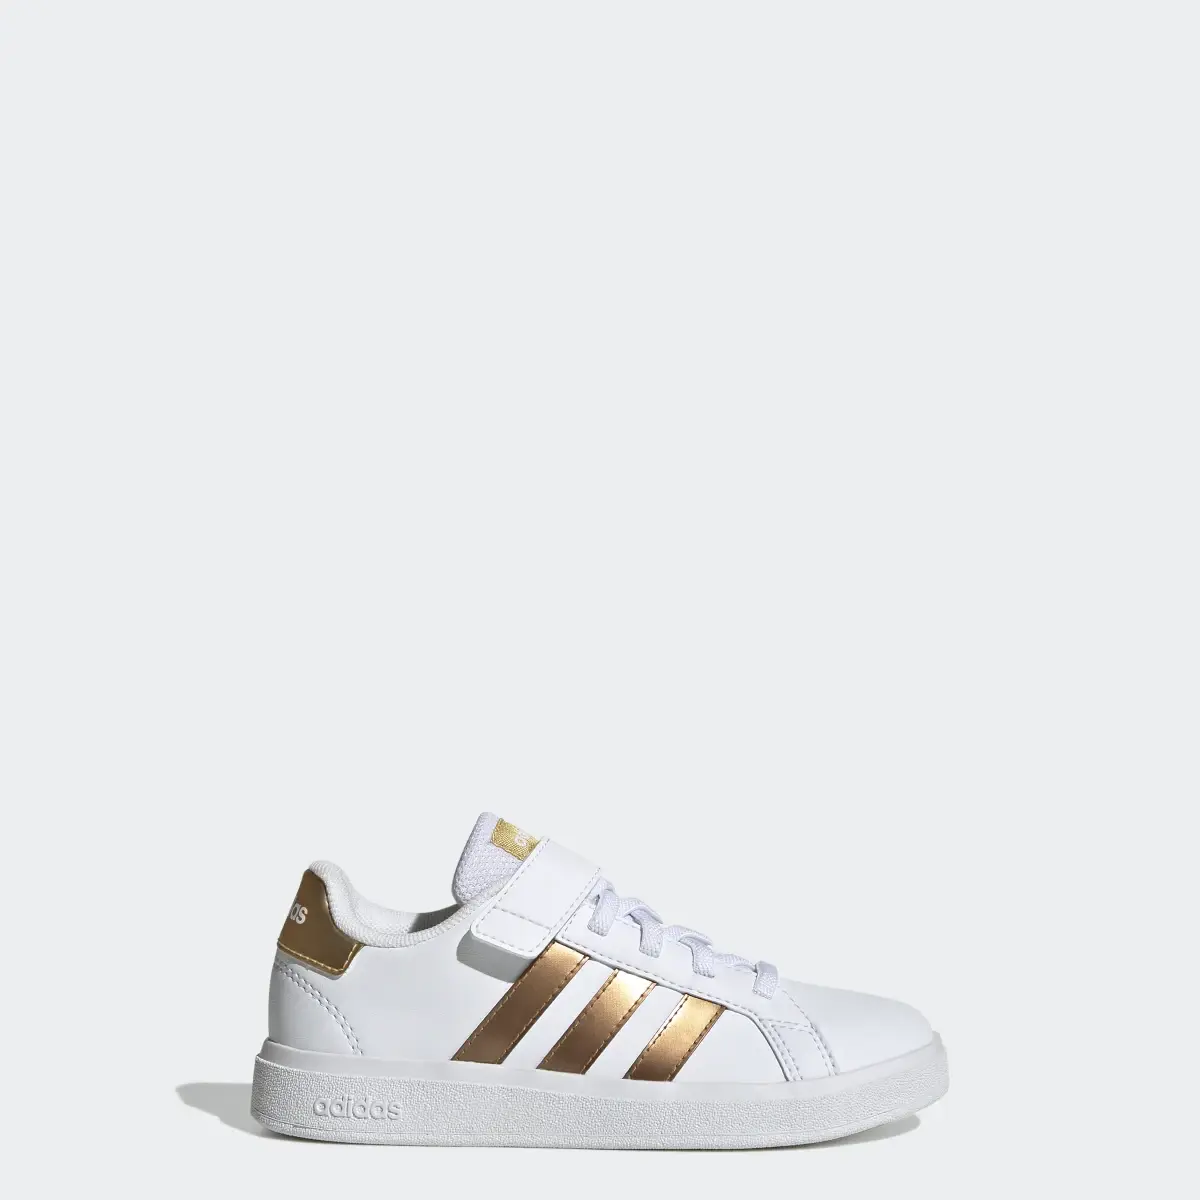 Adidas Grand Court Sustainable Lifestyle Court Elastic Lace and Top Strap Shoes. 1